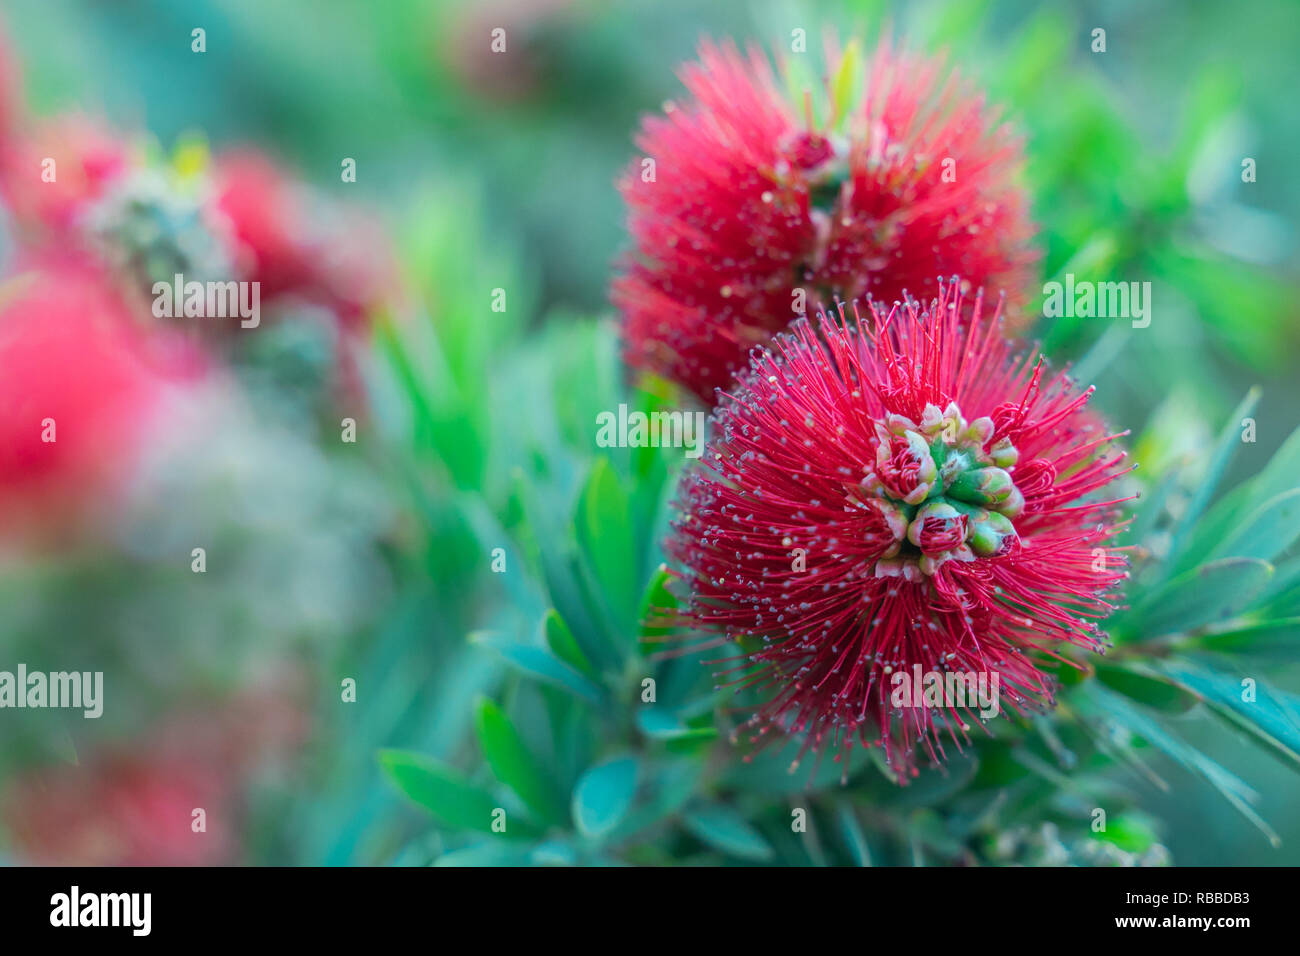 Melaleuca citrina. A close up to (Callistemon).A red flower bottle brush tree the name derives from the plant's flowers which look like brushes for cl Stock Photo